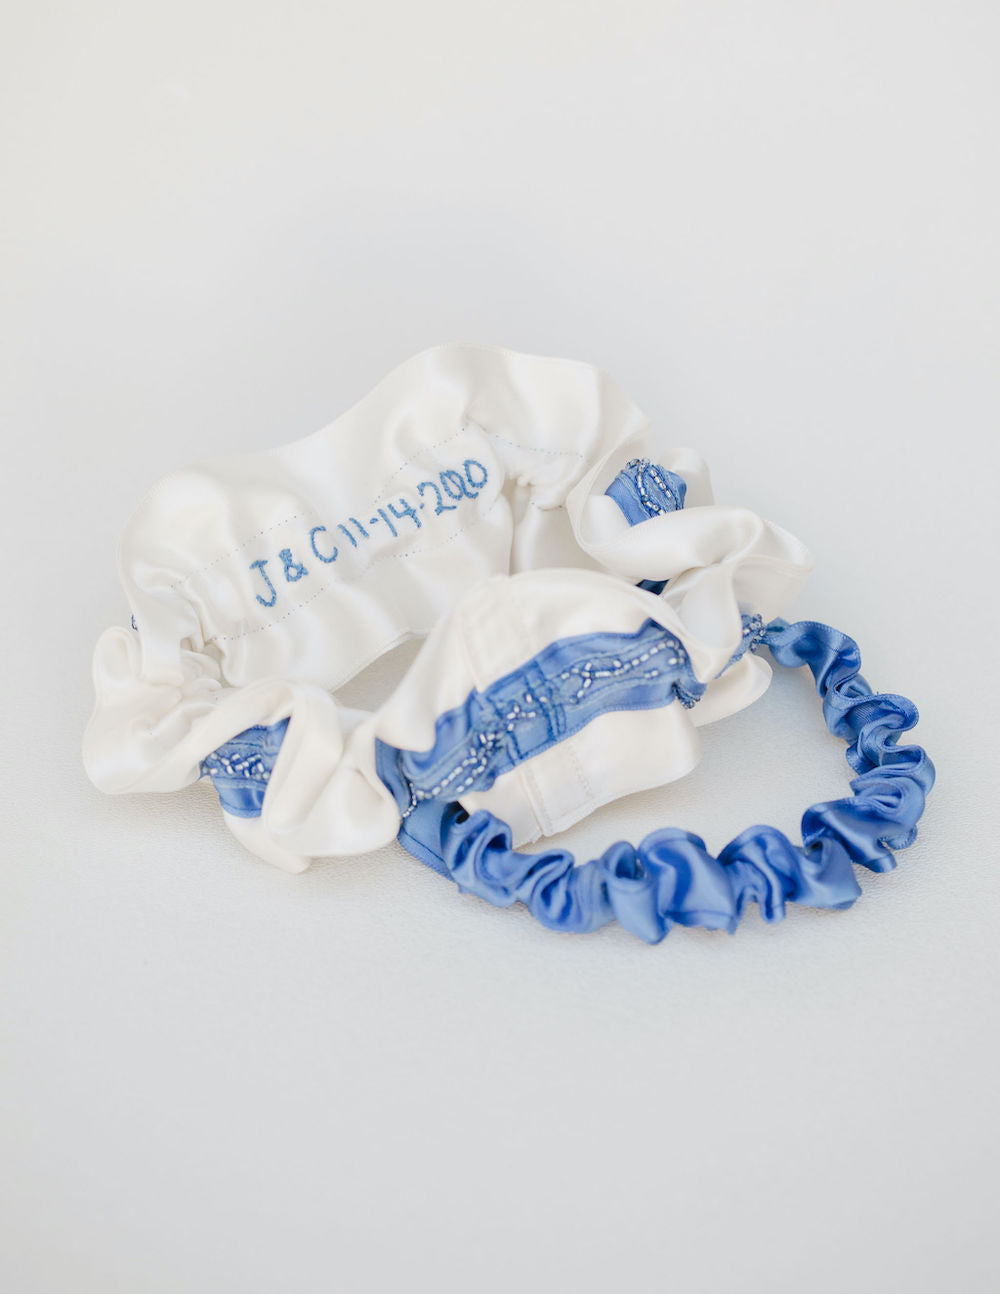 something blue beaded wedding garter set with personalized hand embroidery heirloom by The Garter Girl